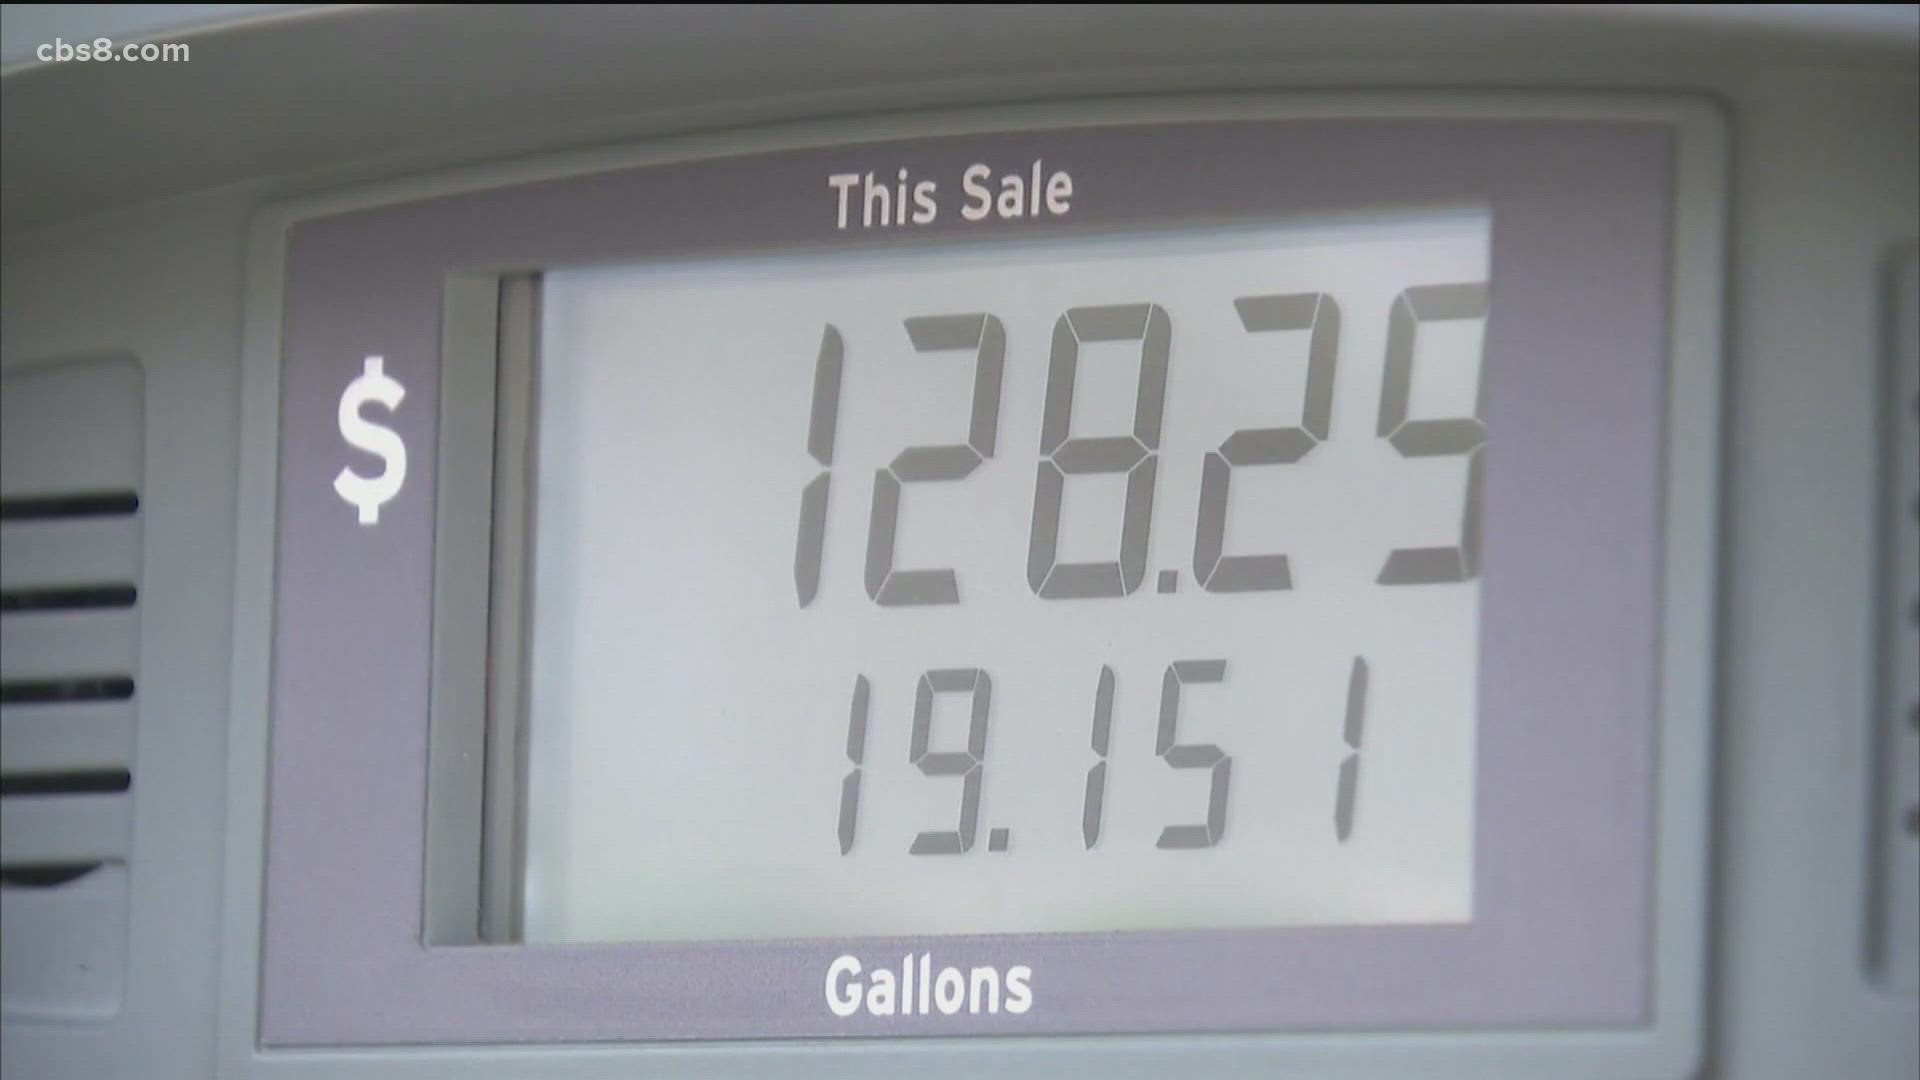 The gas tax is set to go up another 3 cents July 1, if lawmakers don't act by May 1 deadline.